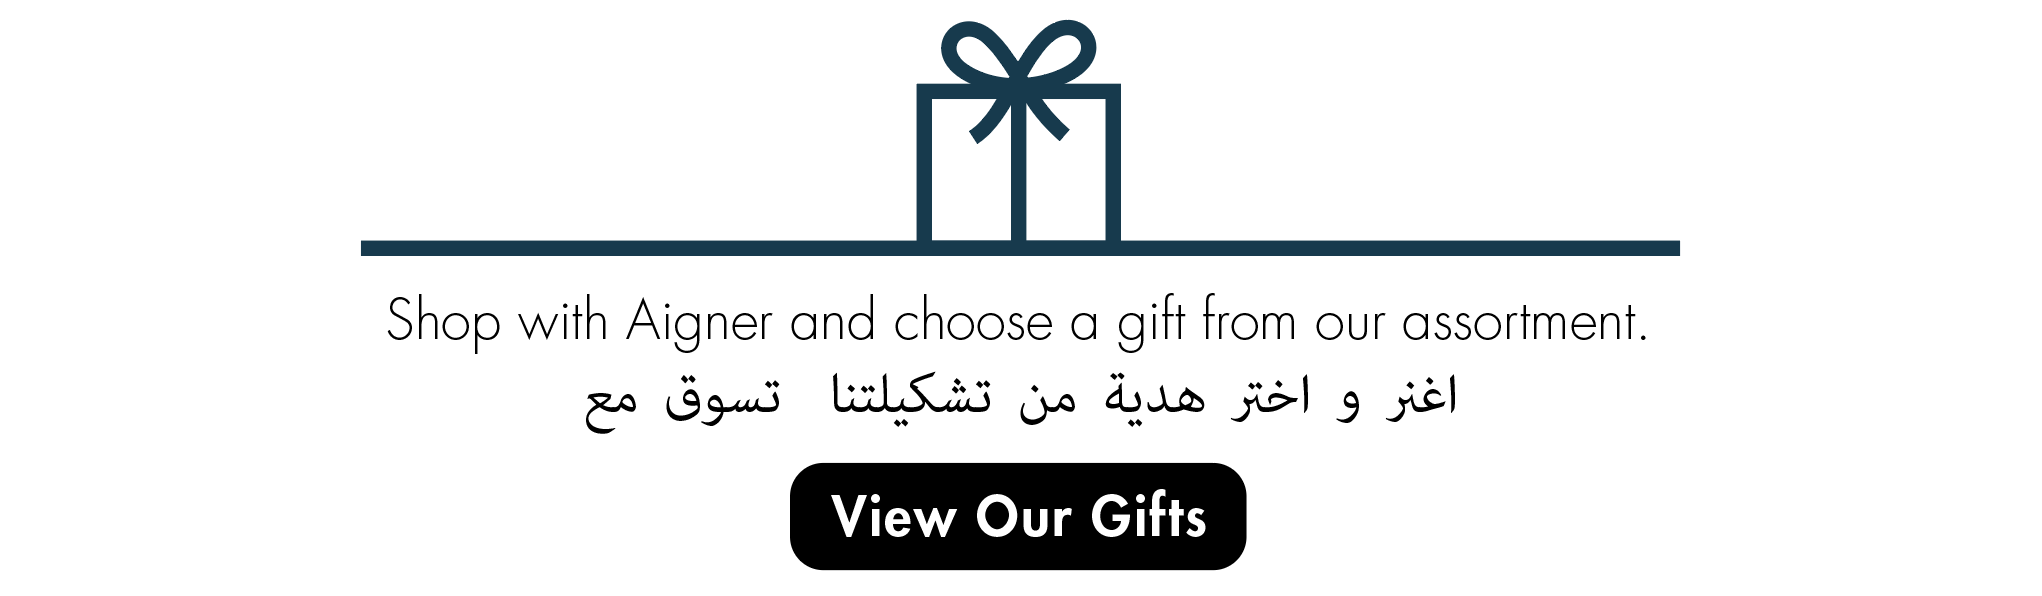 View Our Gifts